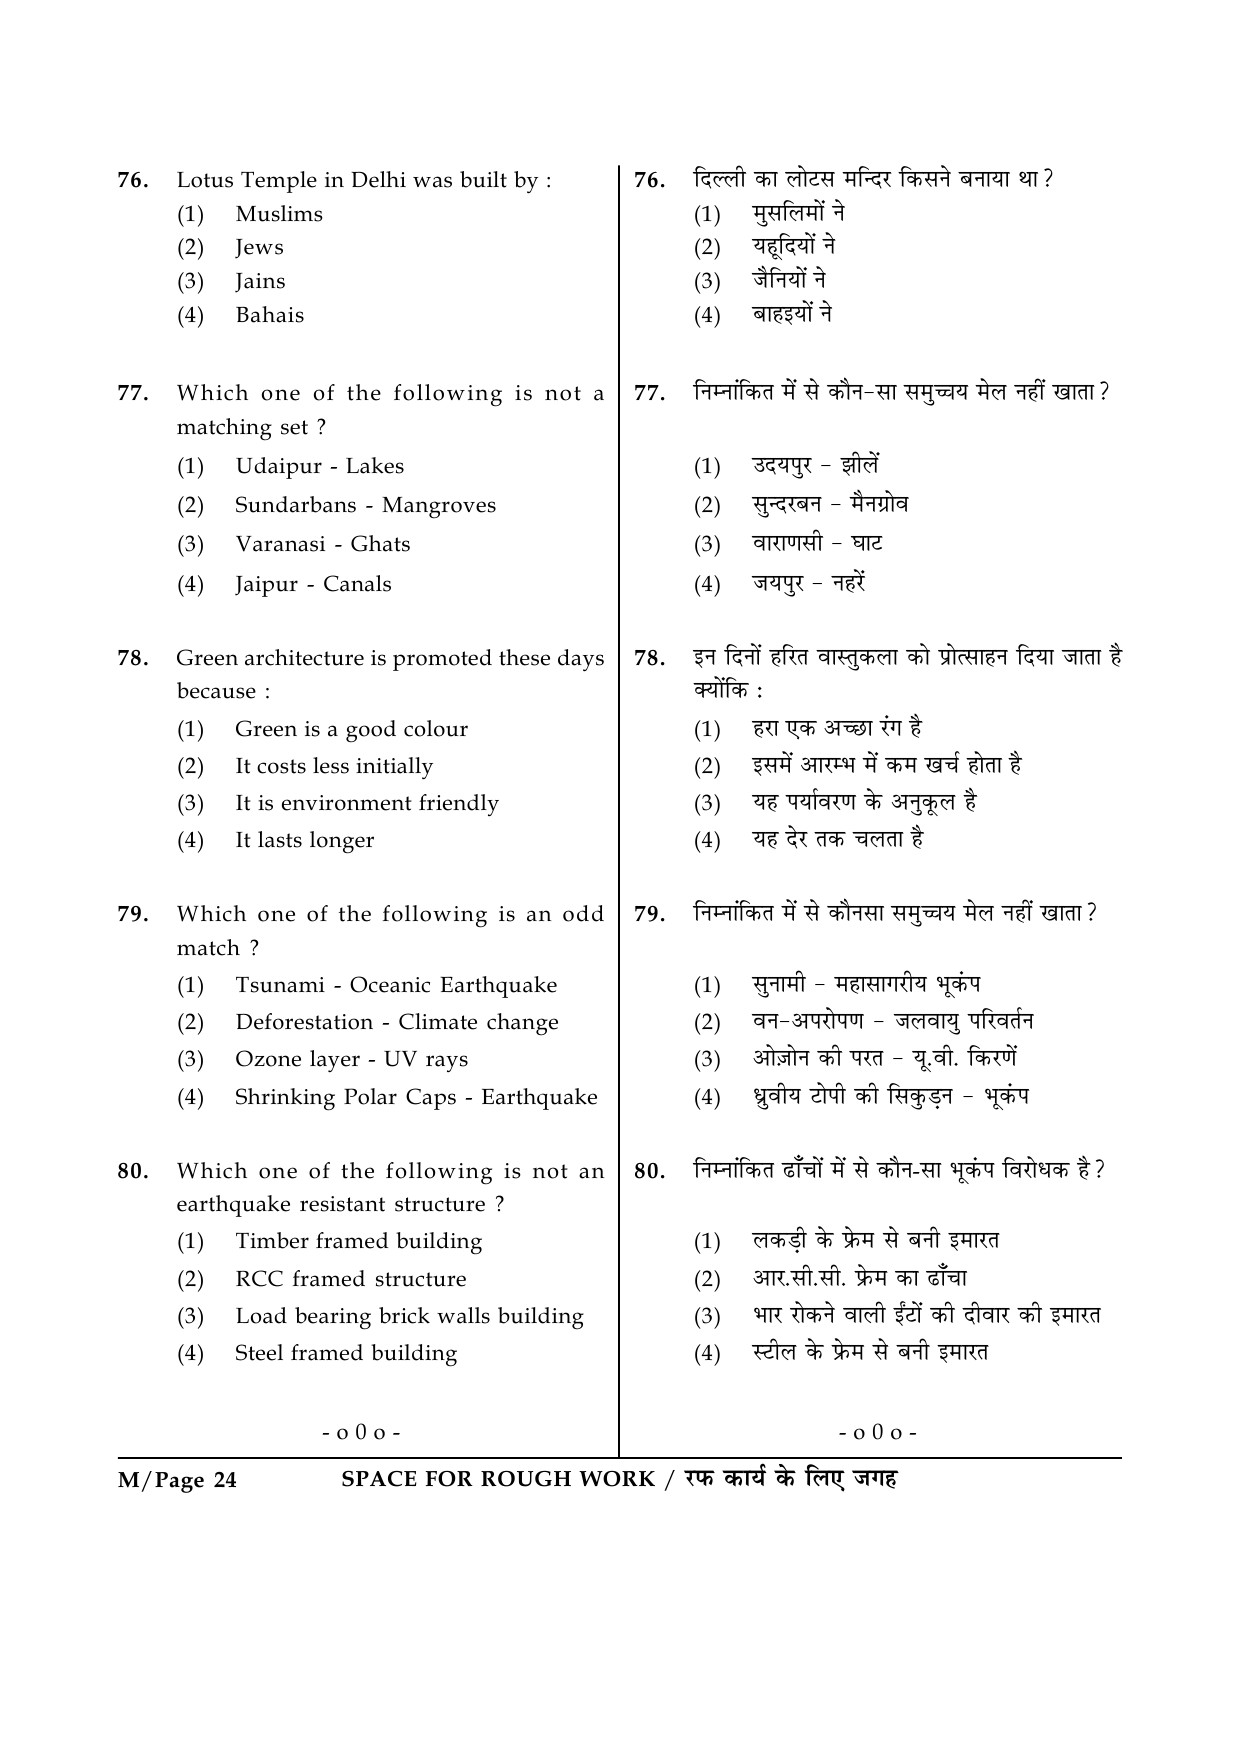 JEE Main Exam Question Paper 2015 Booklet M 24